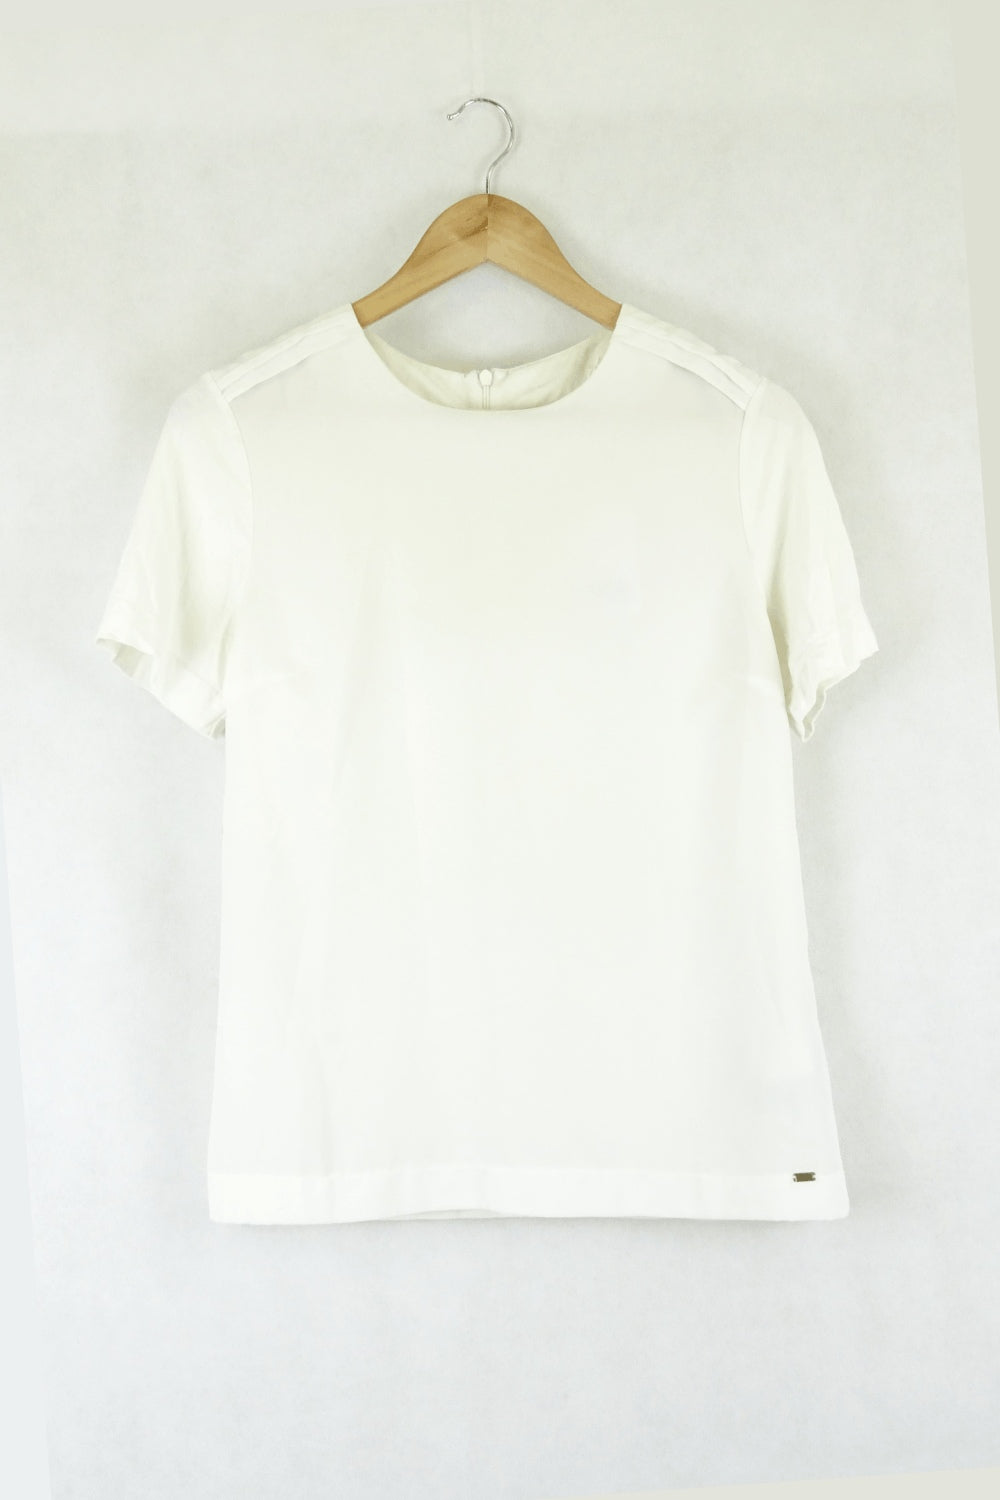 Tommy Hilfiger White Blouse S